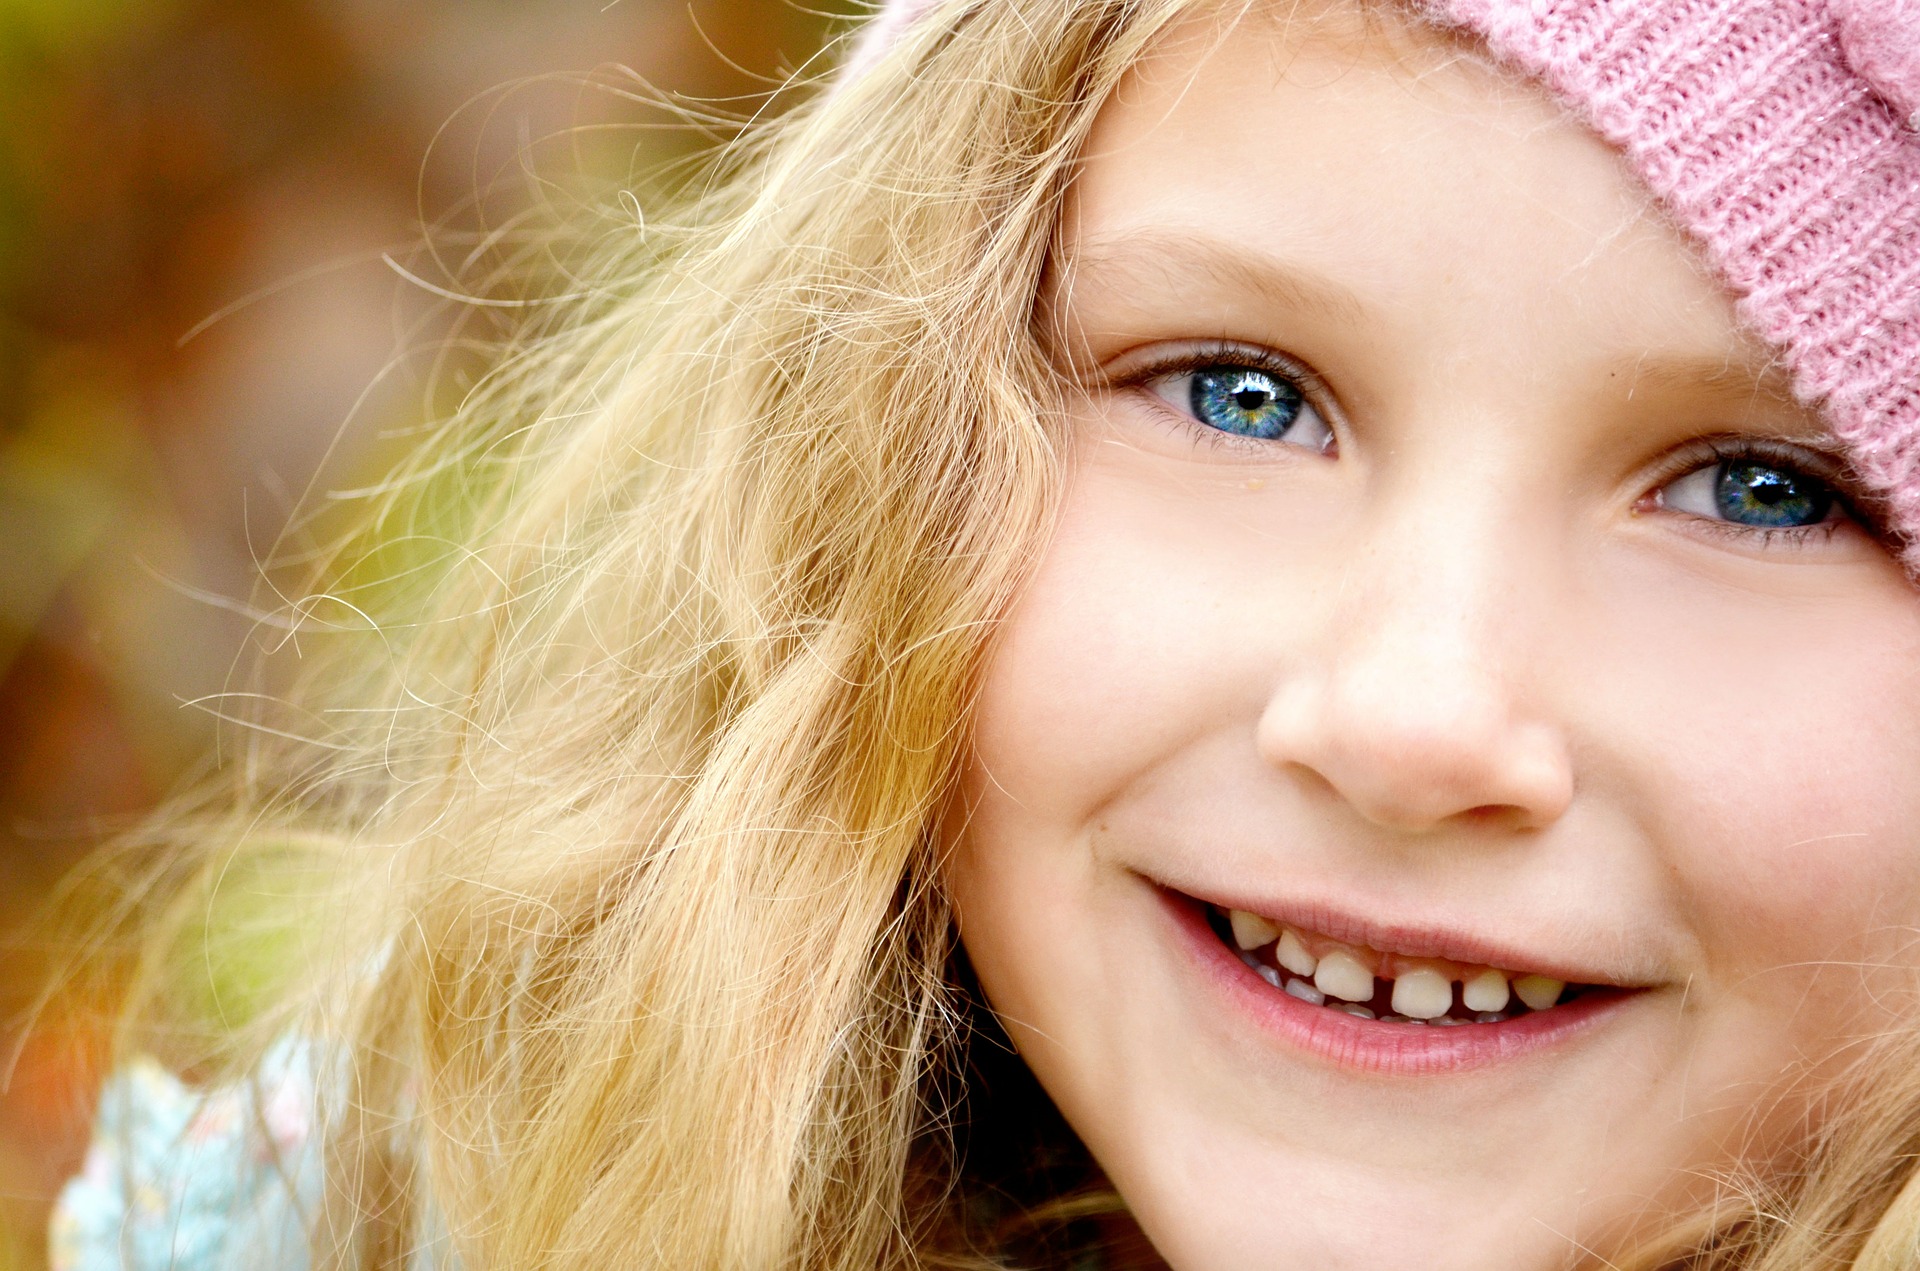 Worried about kid’s oral health - Interesting ideas that help to let them brush